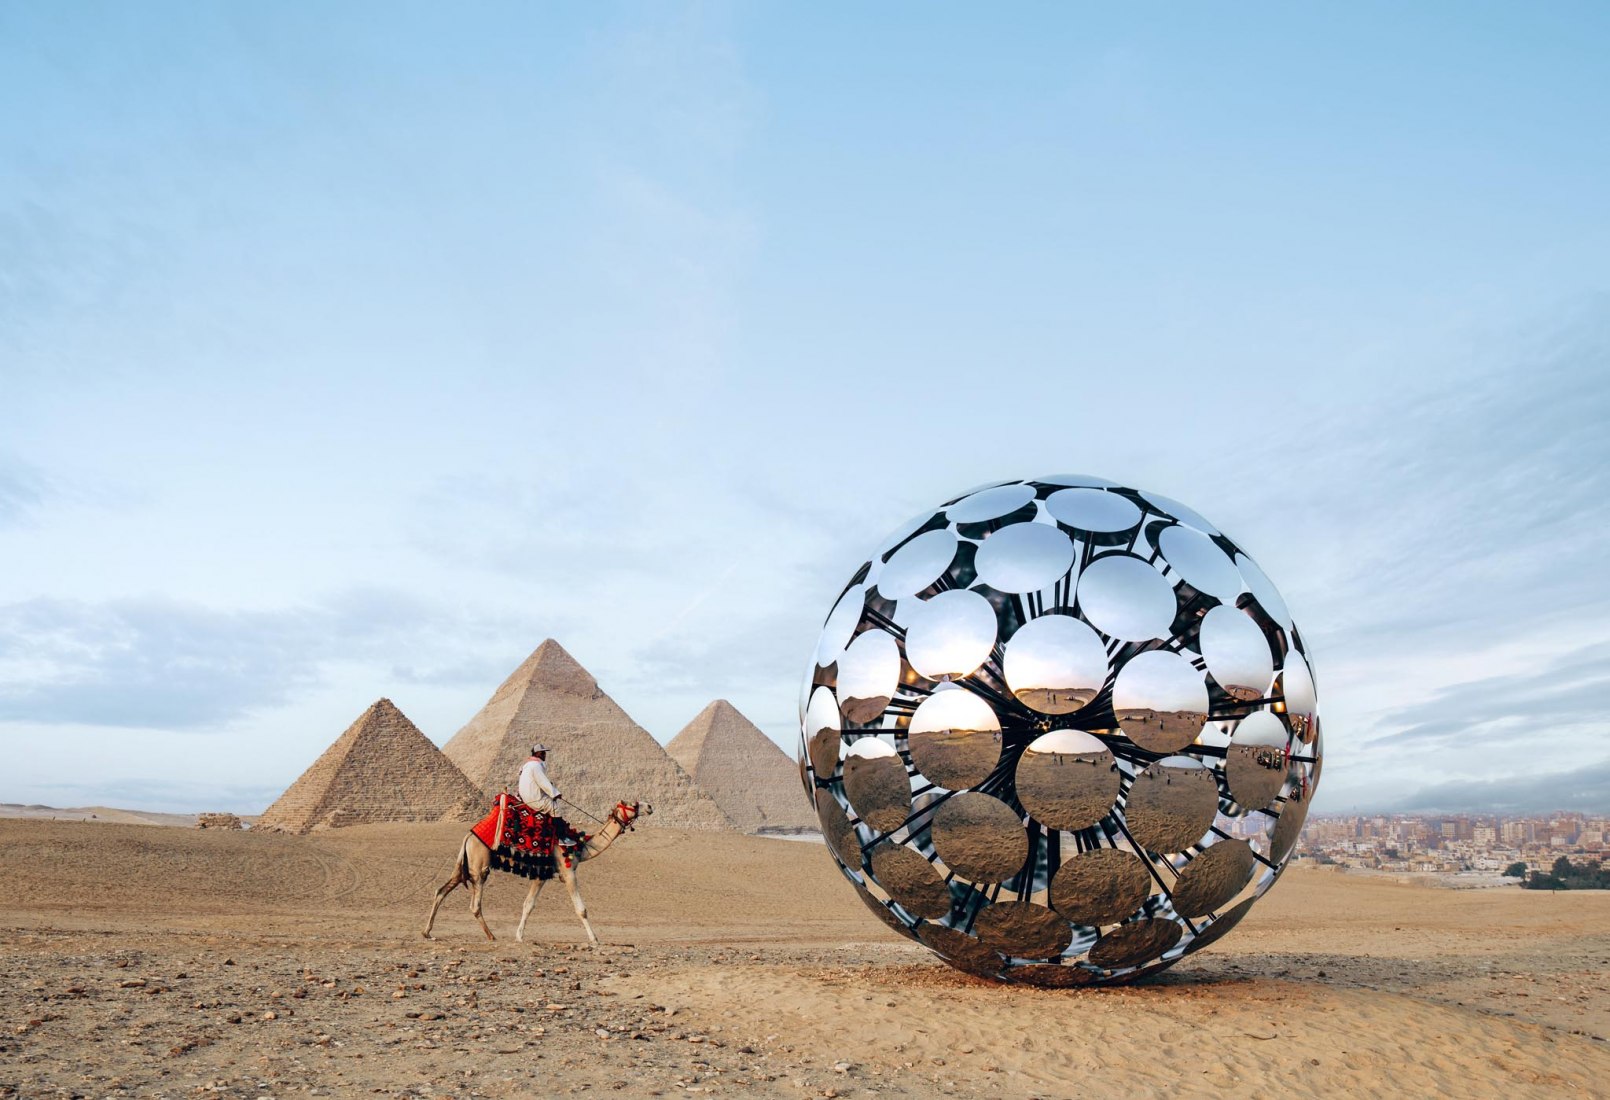 ORB by SpY. For Ever is Now II, Giza. Photograph by Rubén P. Bescós